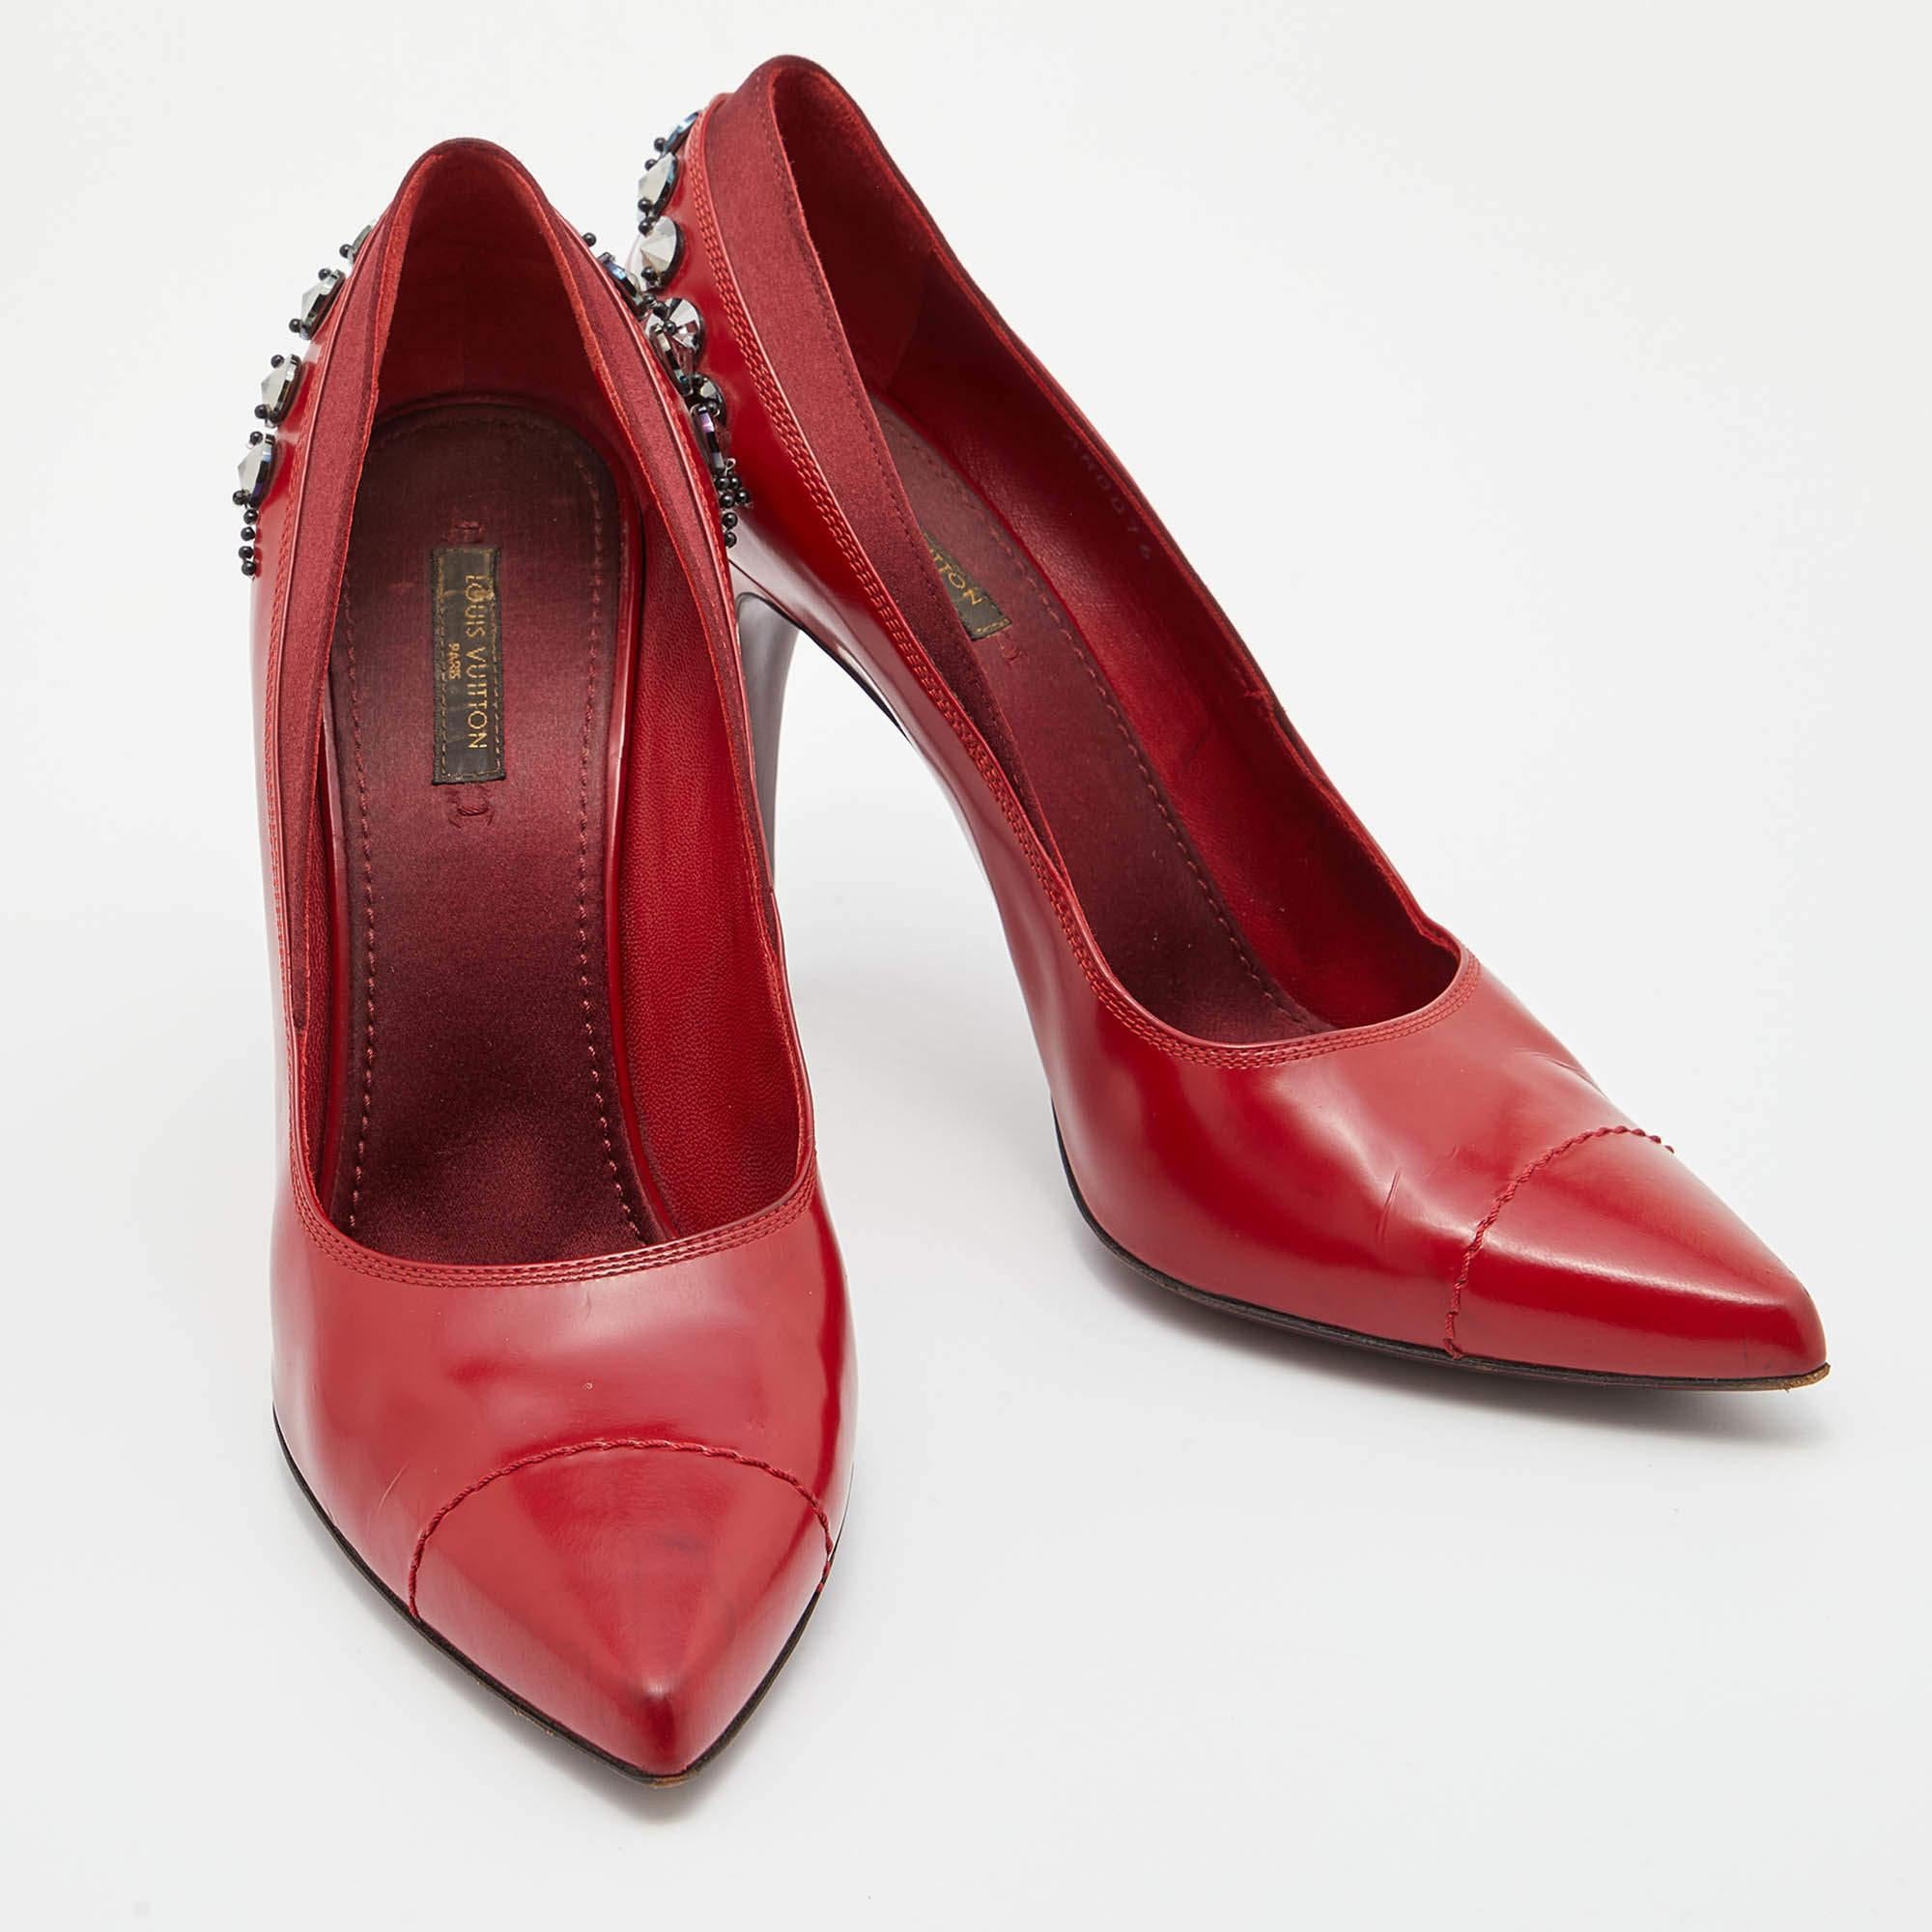 Louis Vuitton Red Leather and Satin Crystal Embellished Pumps Size 39 For Sale 1